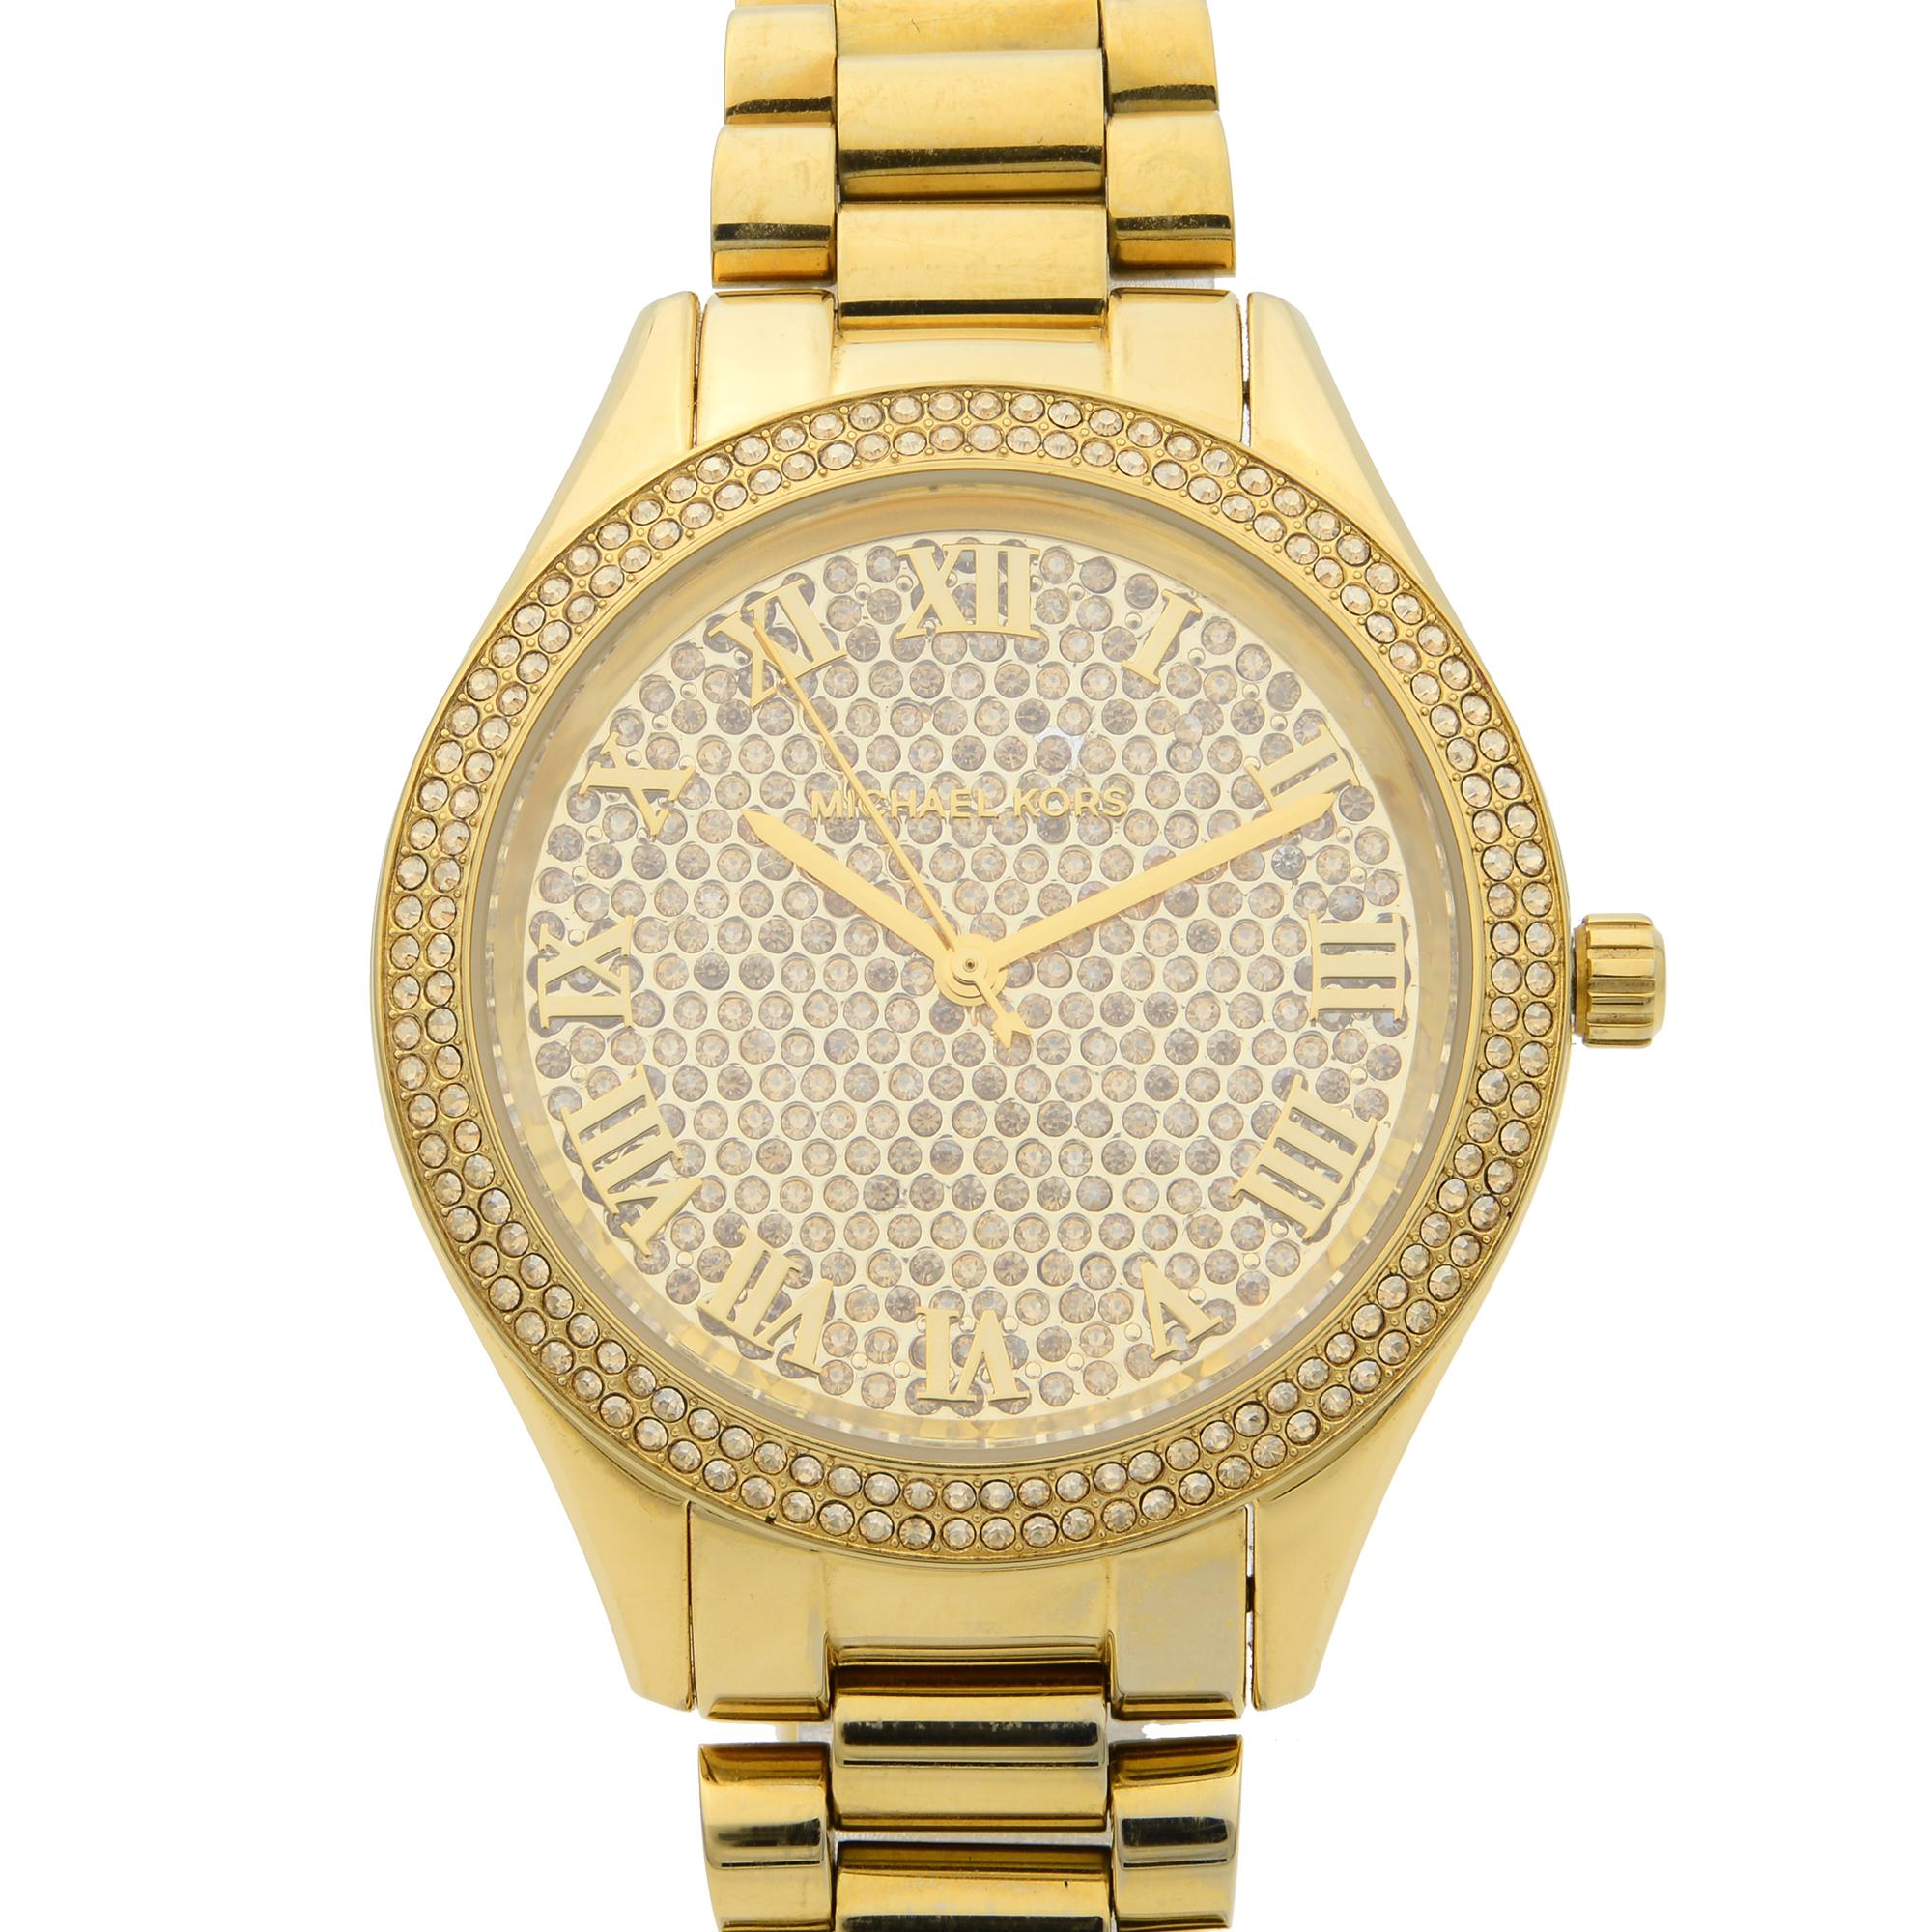 This pre-owned Michael Kors MK3319 Watch is a beautiful women's timepiece that is powered by quartz (battery) movement which is cased in a stainless steel case. It has a round shape face and has hand sticks style markers. It is completed with a